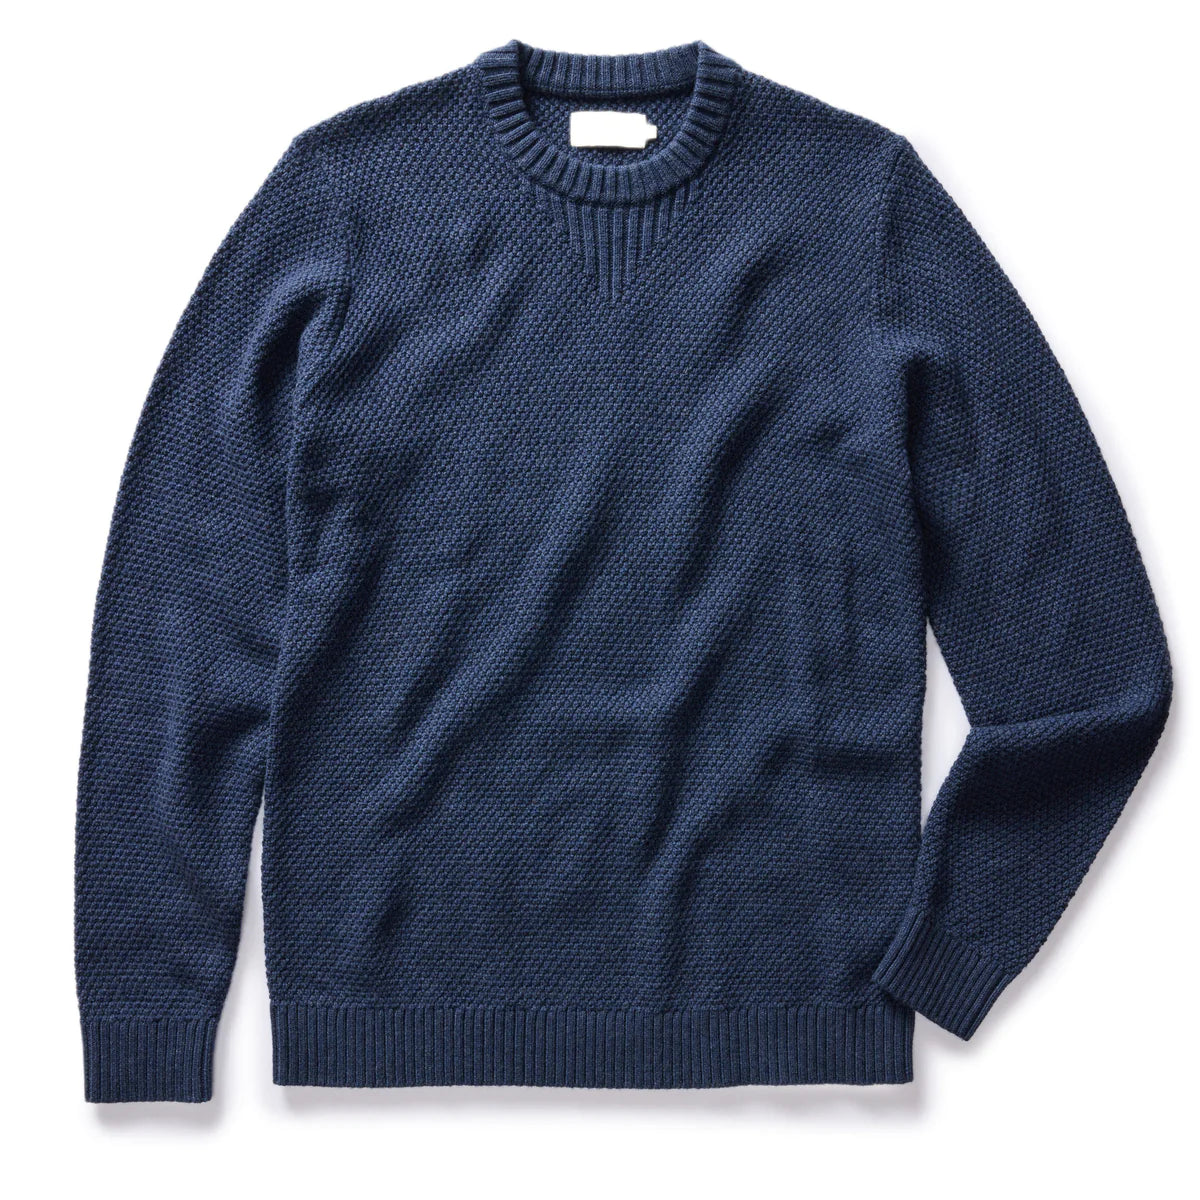 Taylor Stitch - Russell Sweater in Heather Blue